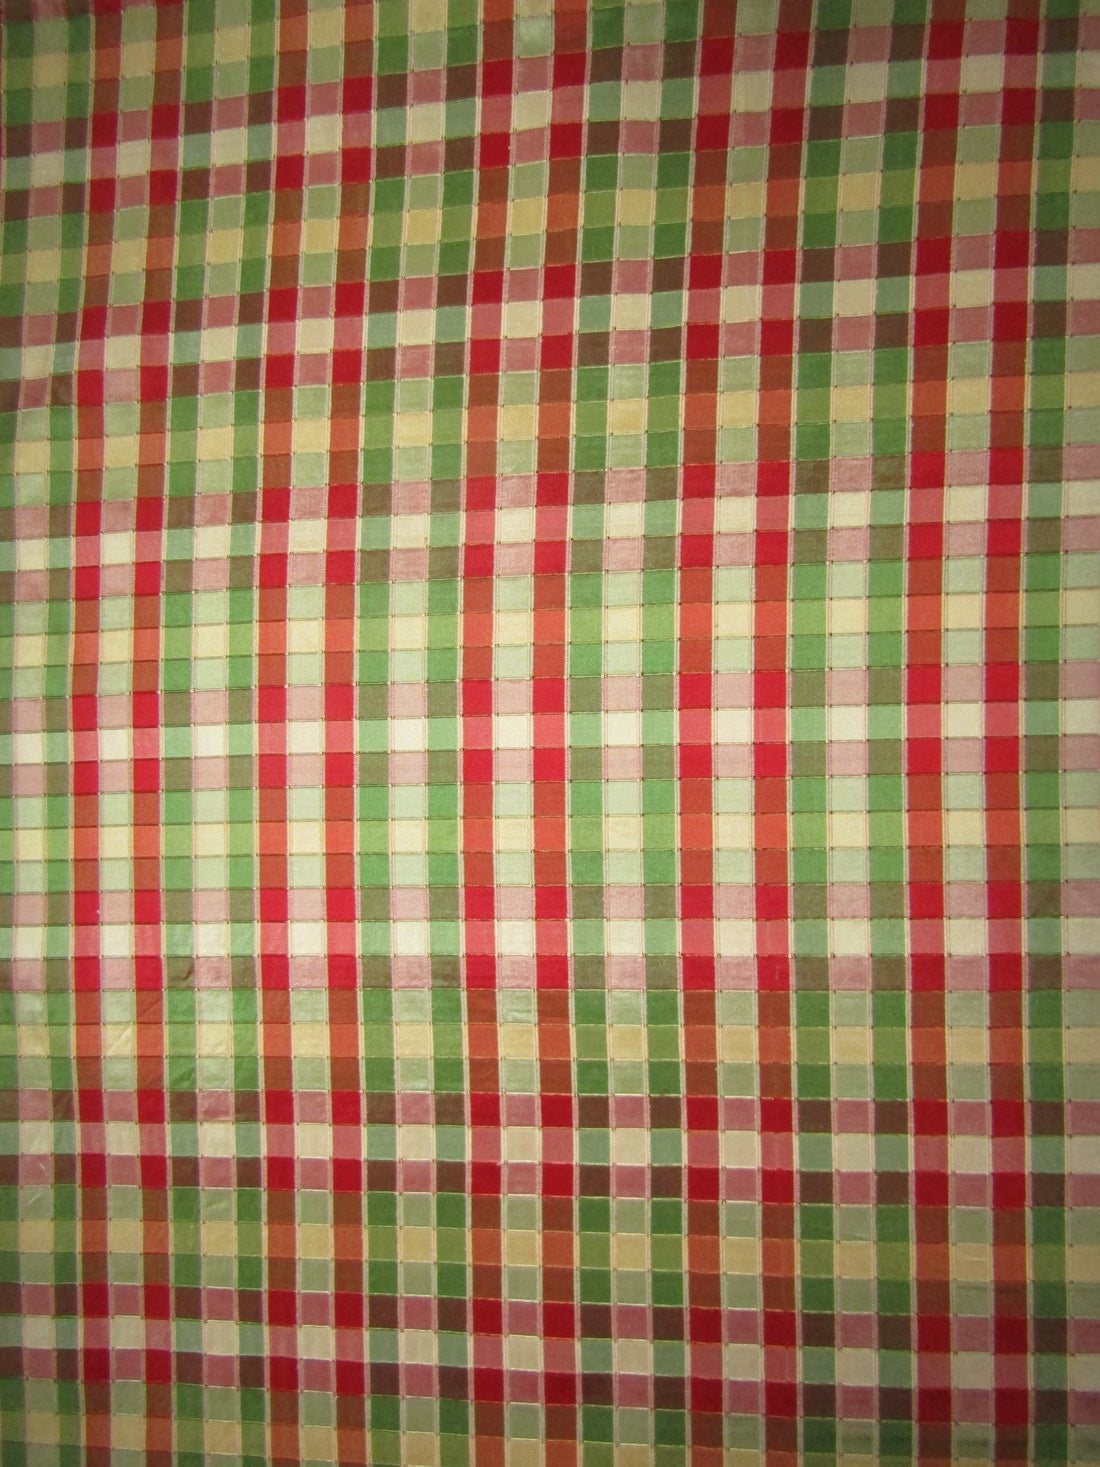 100% PURE SILK DUPIONI FABRIC multi color PLAIDS shades of red green and gold 54" WIDE DUP#C121[1]